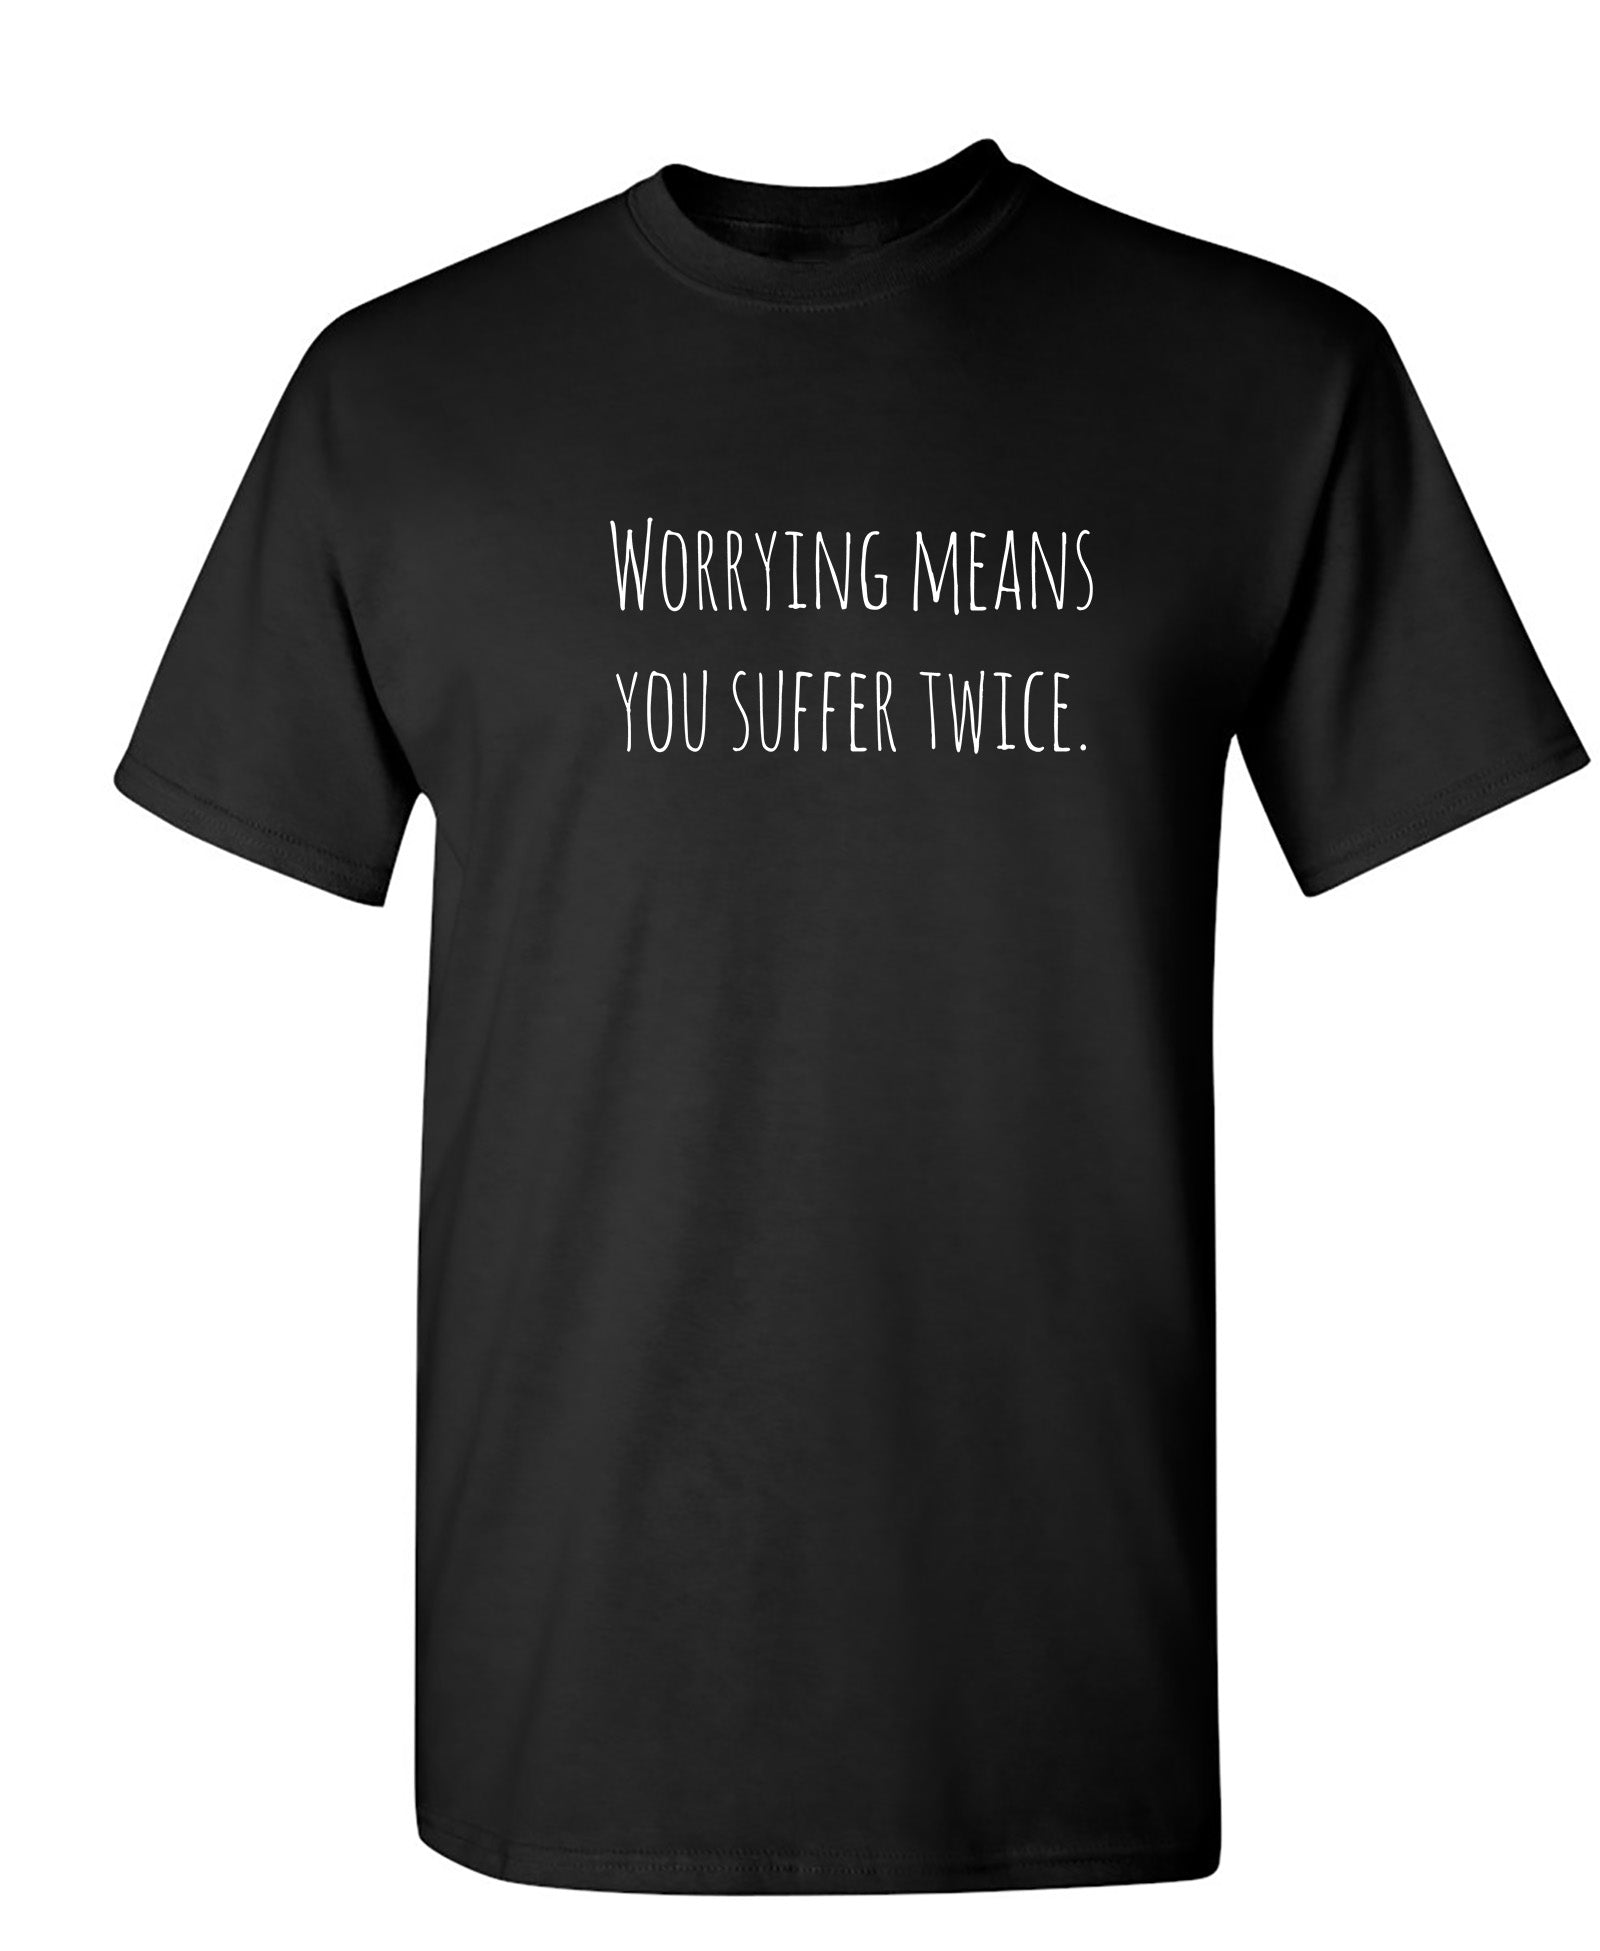 Worrying Means You Suffer Twice - Funny T Shirts & Graphic Tees